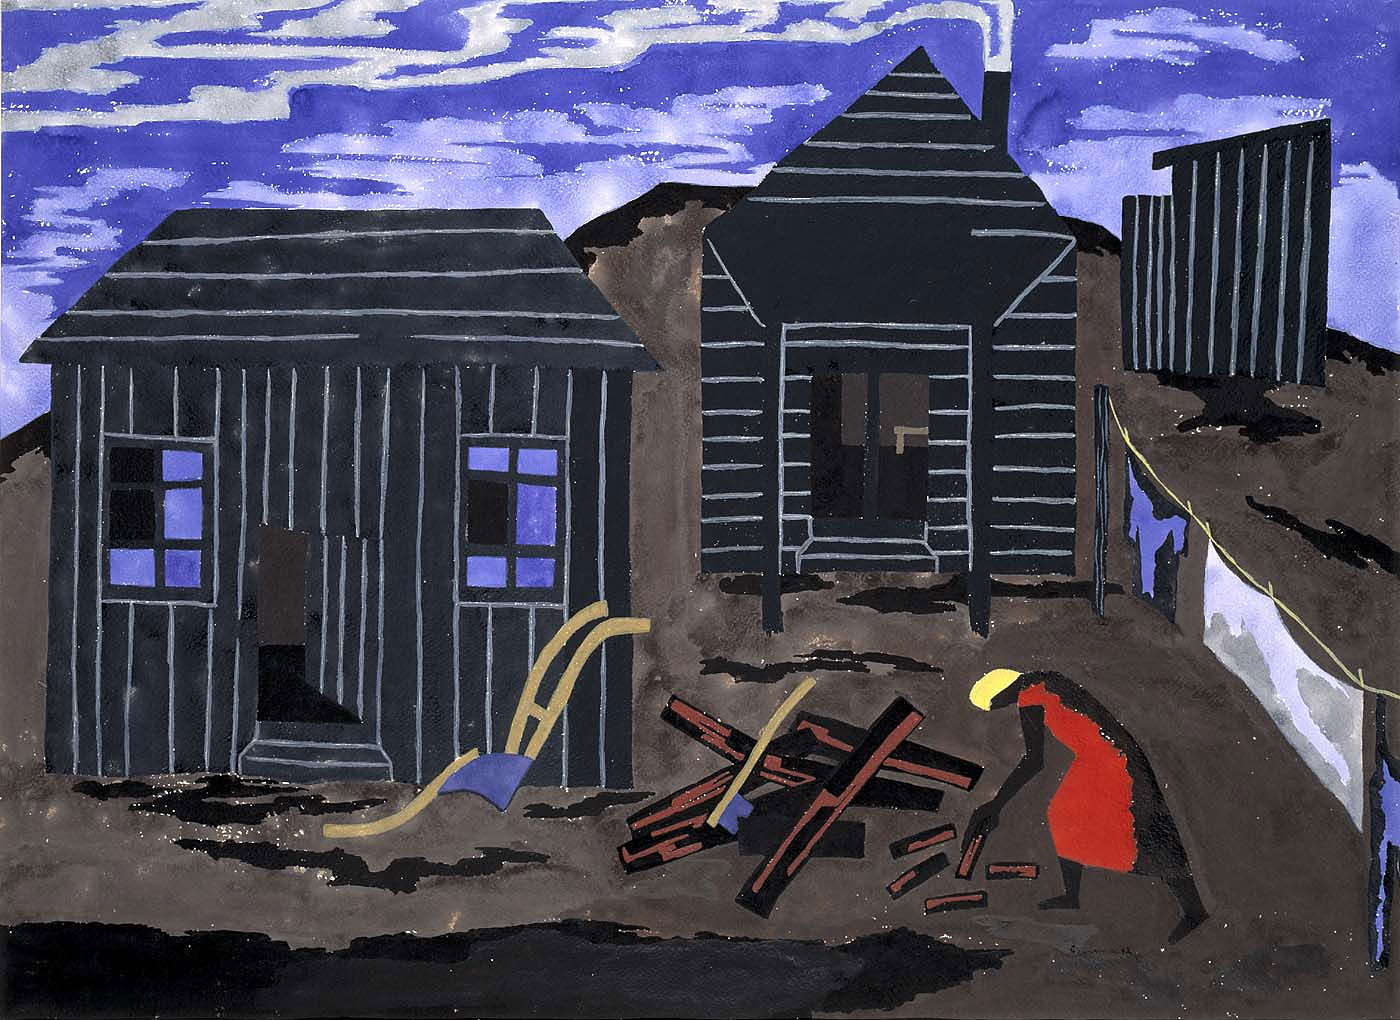 A painting. A woman gathers firewood into a pile in front of two small houses and a clothing line. The sky is purple and streaked with clouds.